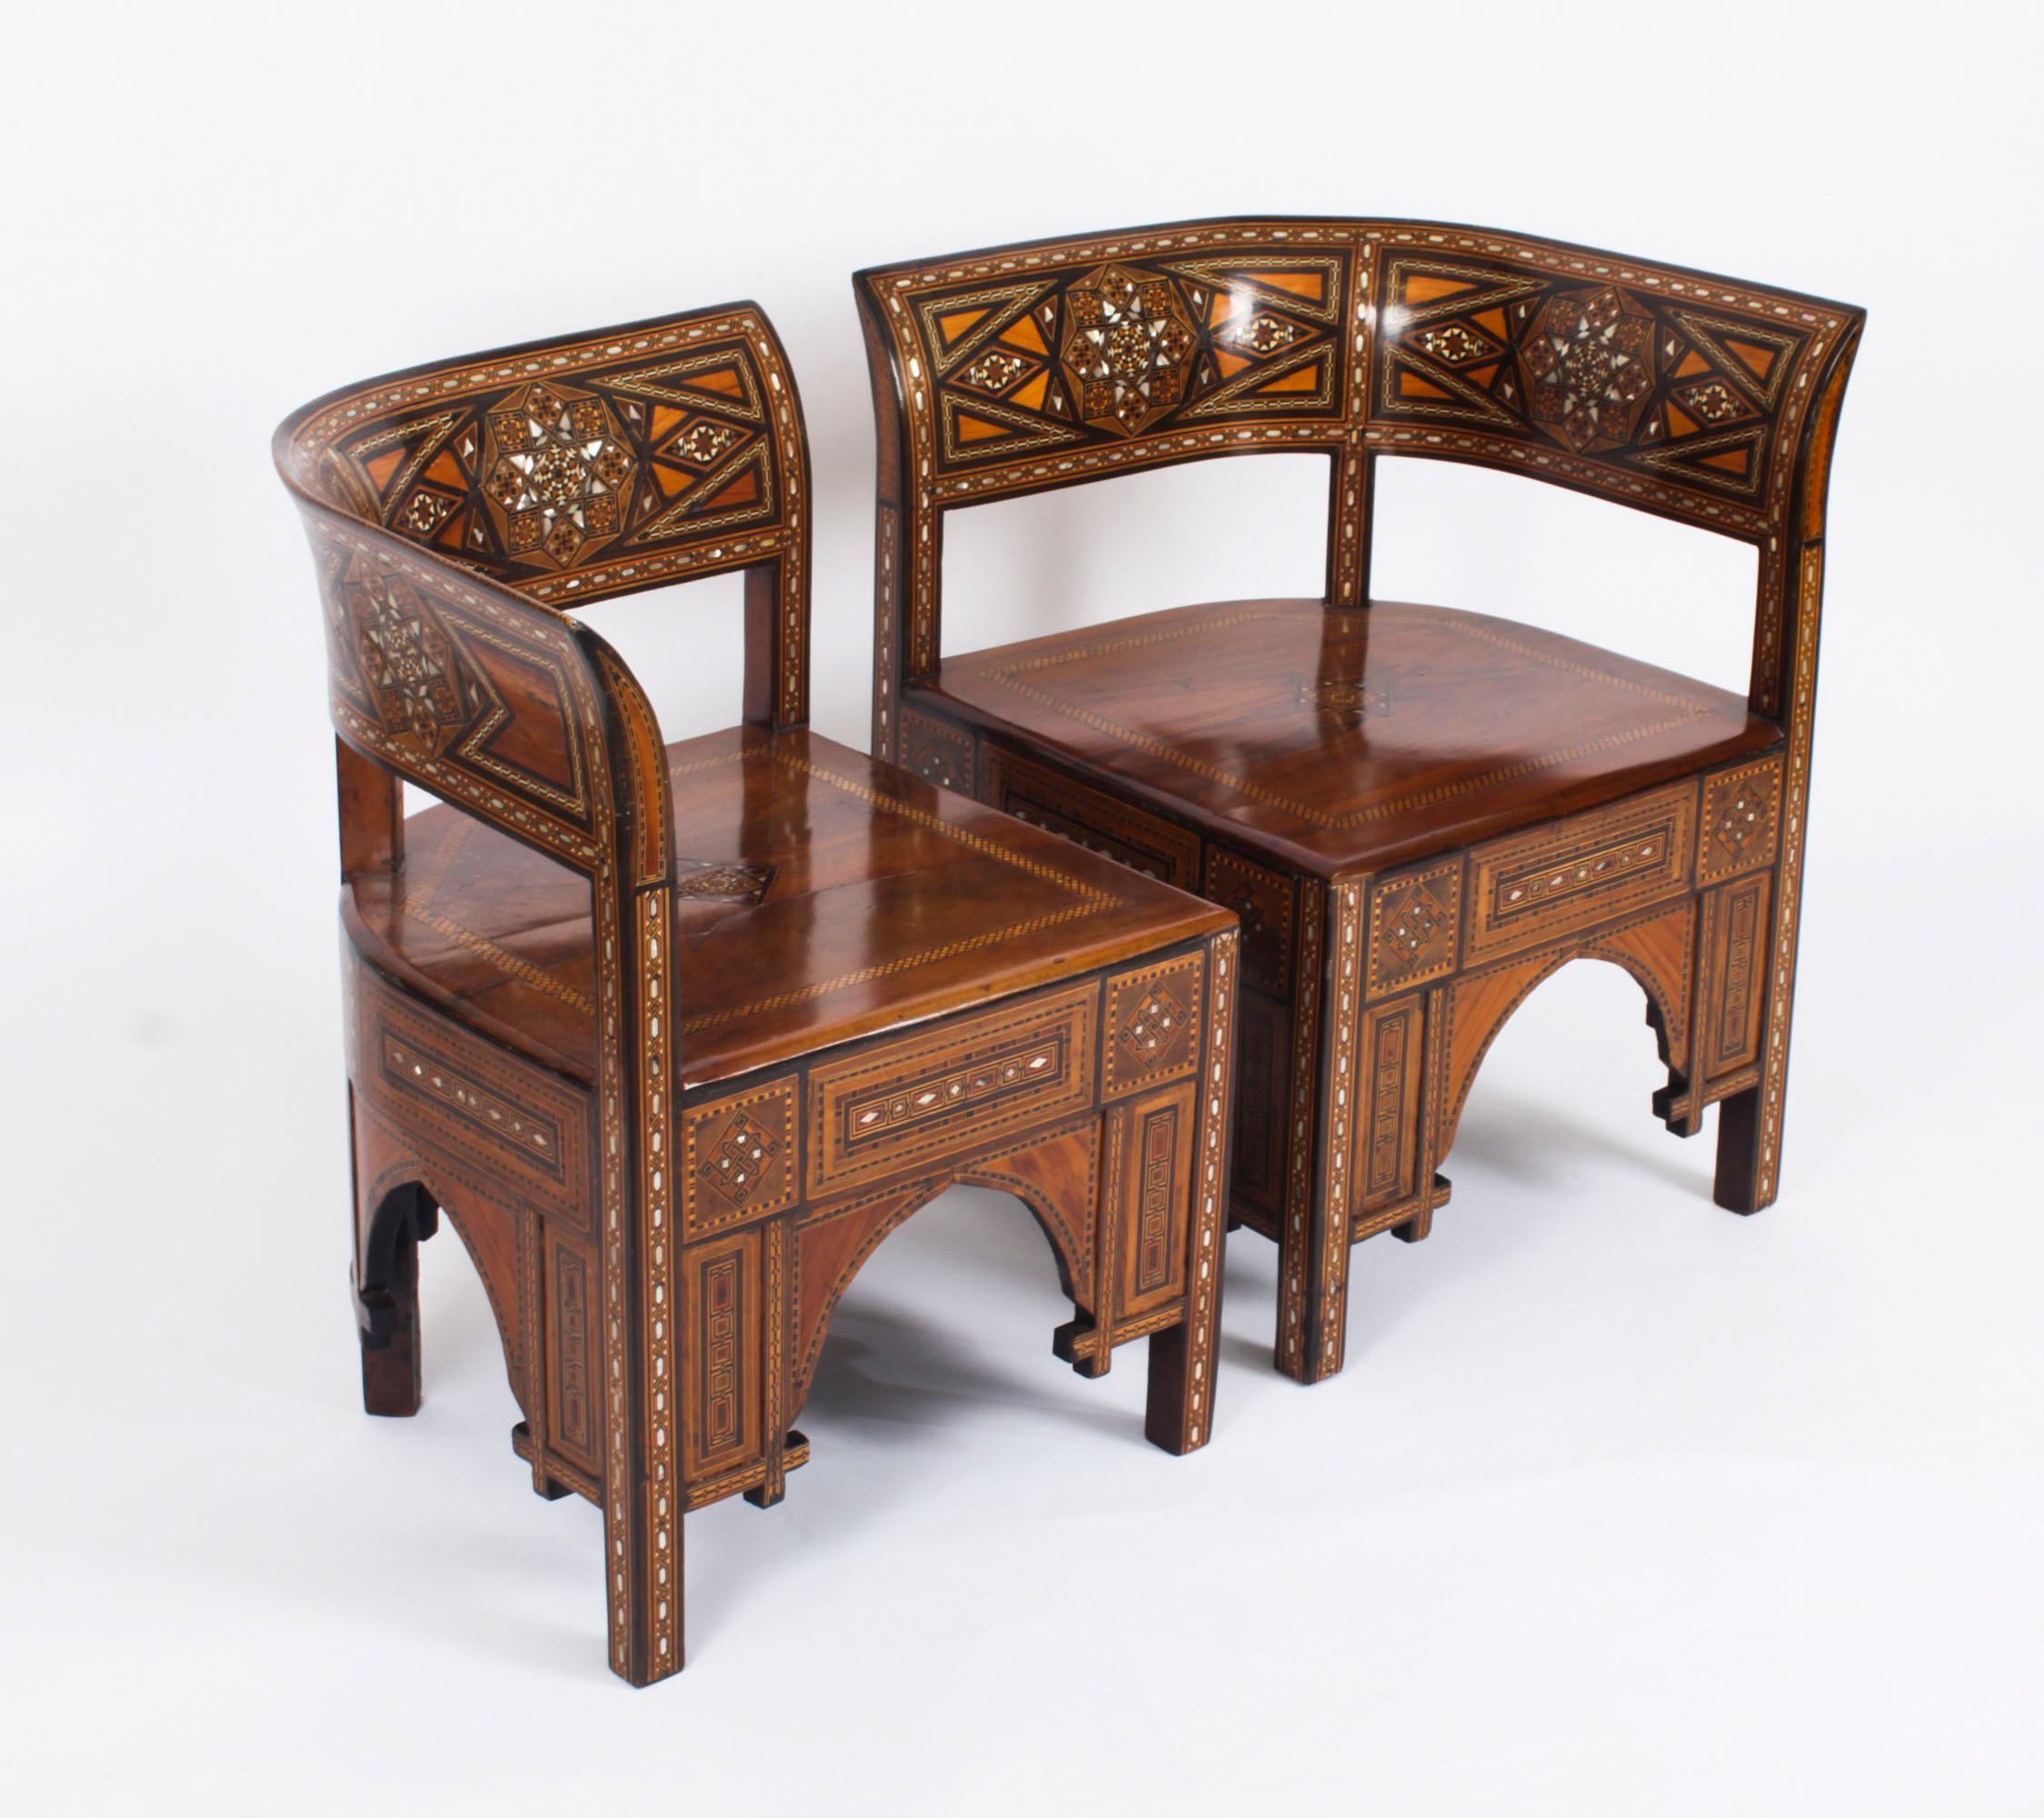 A superb pair of Syrian Damascus armchairs, Circa 1900 in date.

The stunning pair of parquetry armchairs are exquisitely crafted in hardwood with wonderful  inlaid decoration comprising, ebony, walnut and various fruitwoods, and they feature